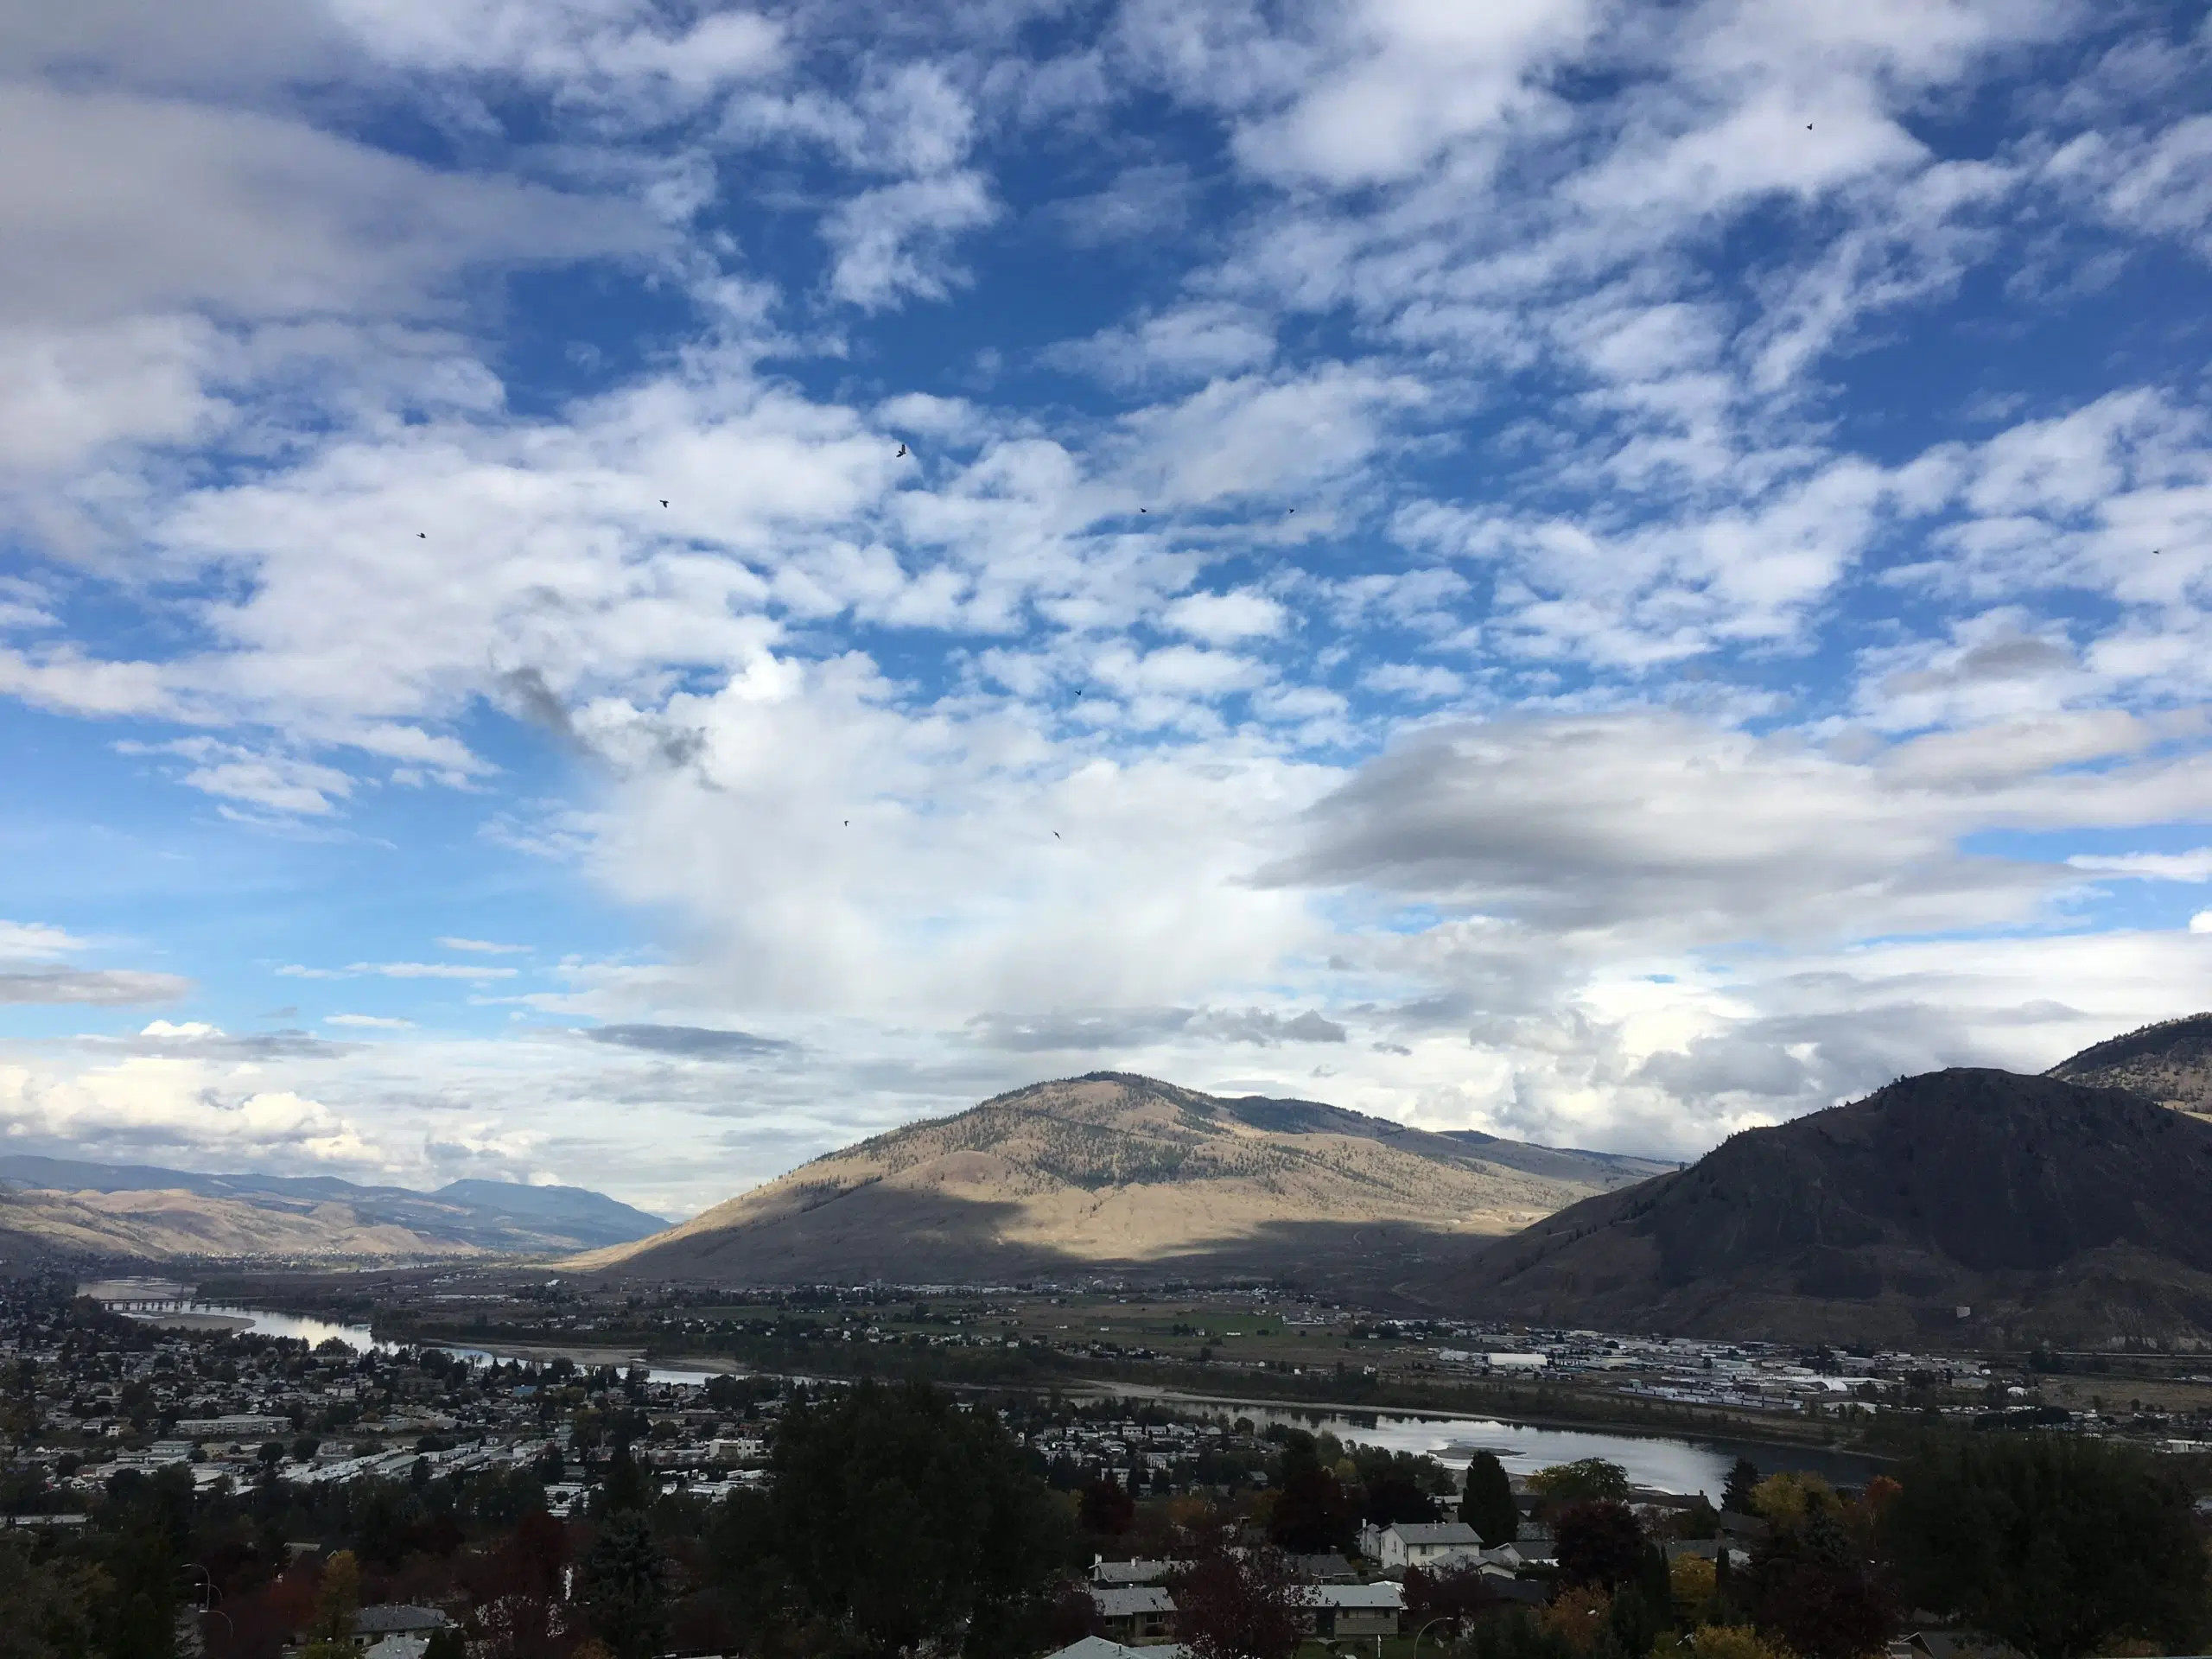 After yesterday's record breaking heat in Kamloops, Environment Canada says cooler weather is on the horizon